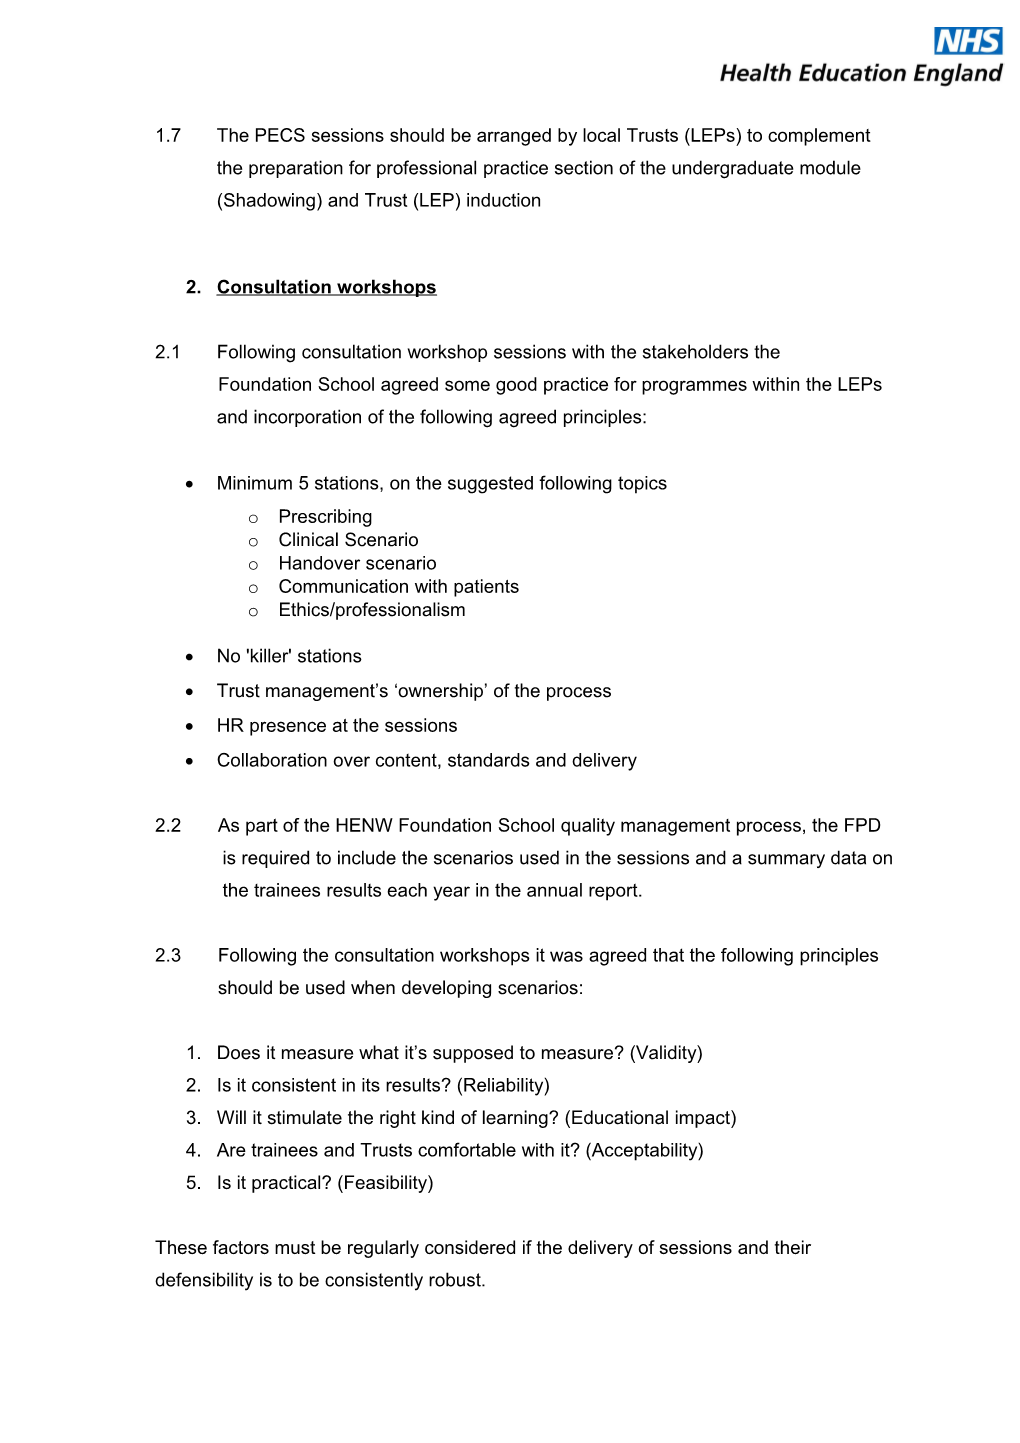 North Western Deanery Foundation School Advisory Notes on Pre Employment Competency Screening